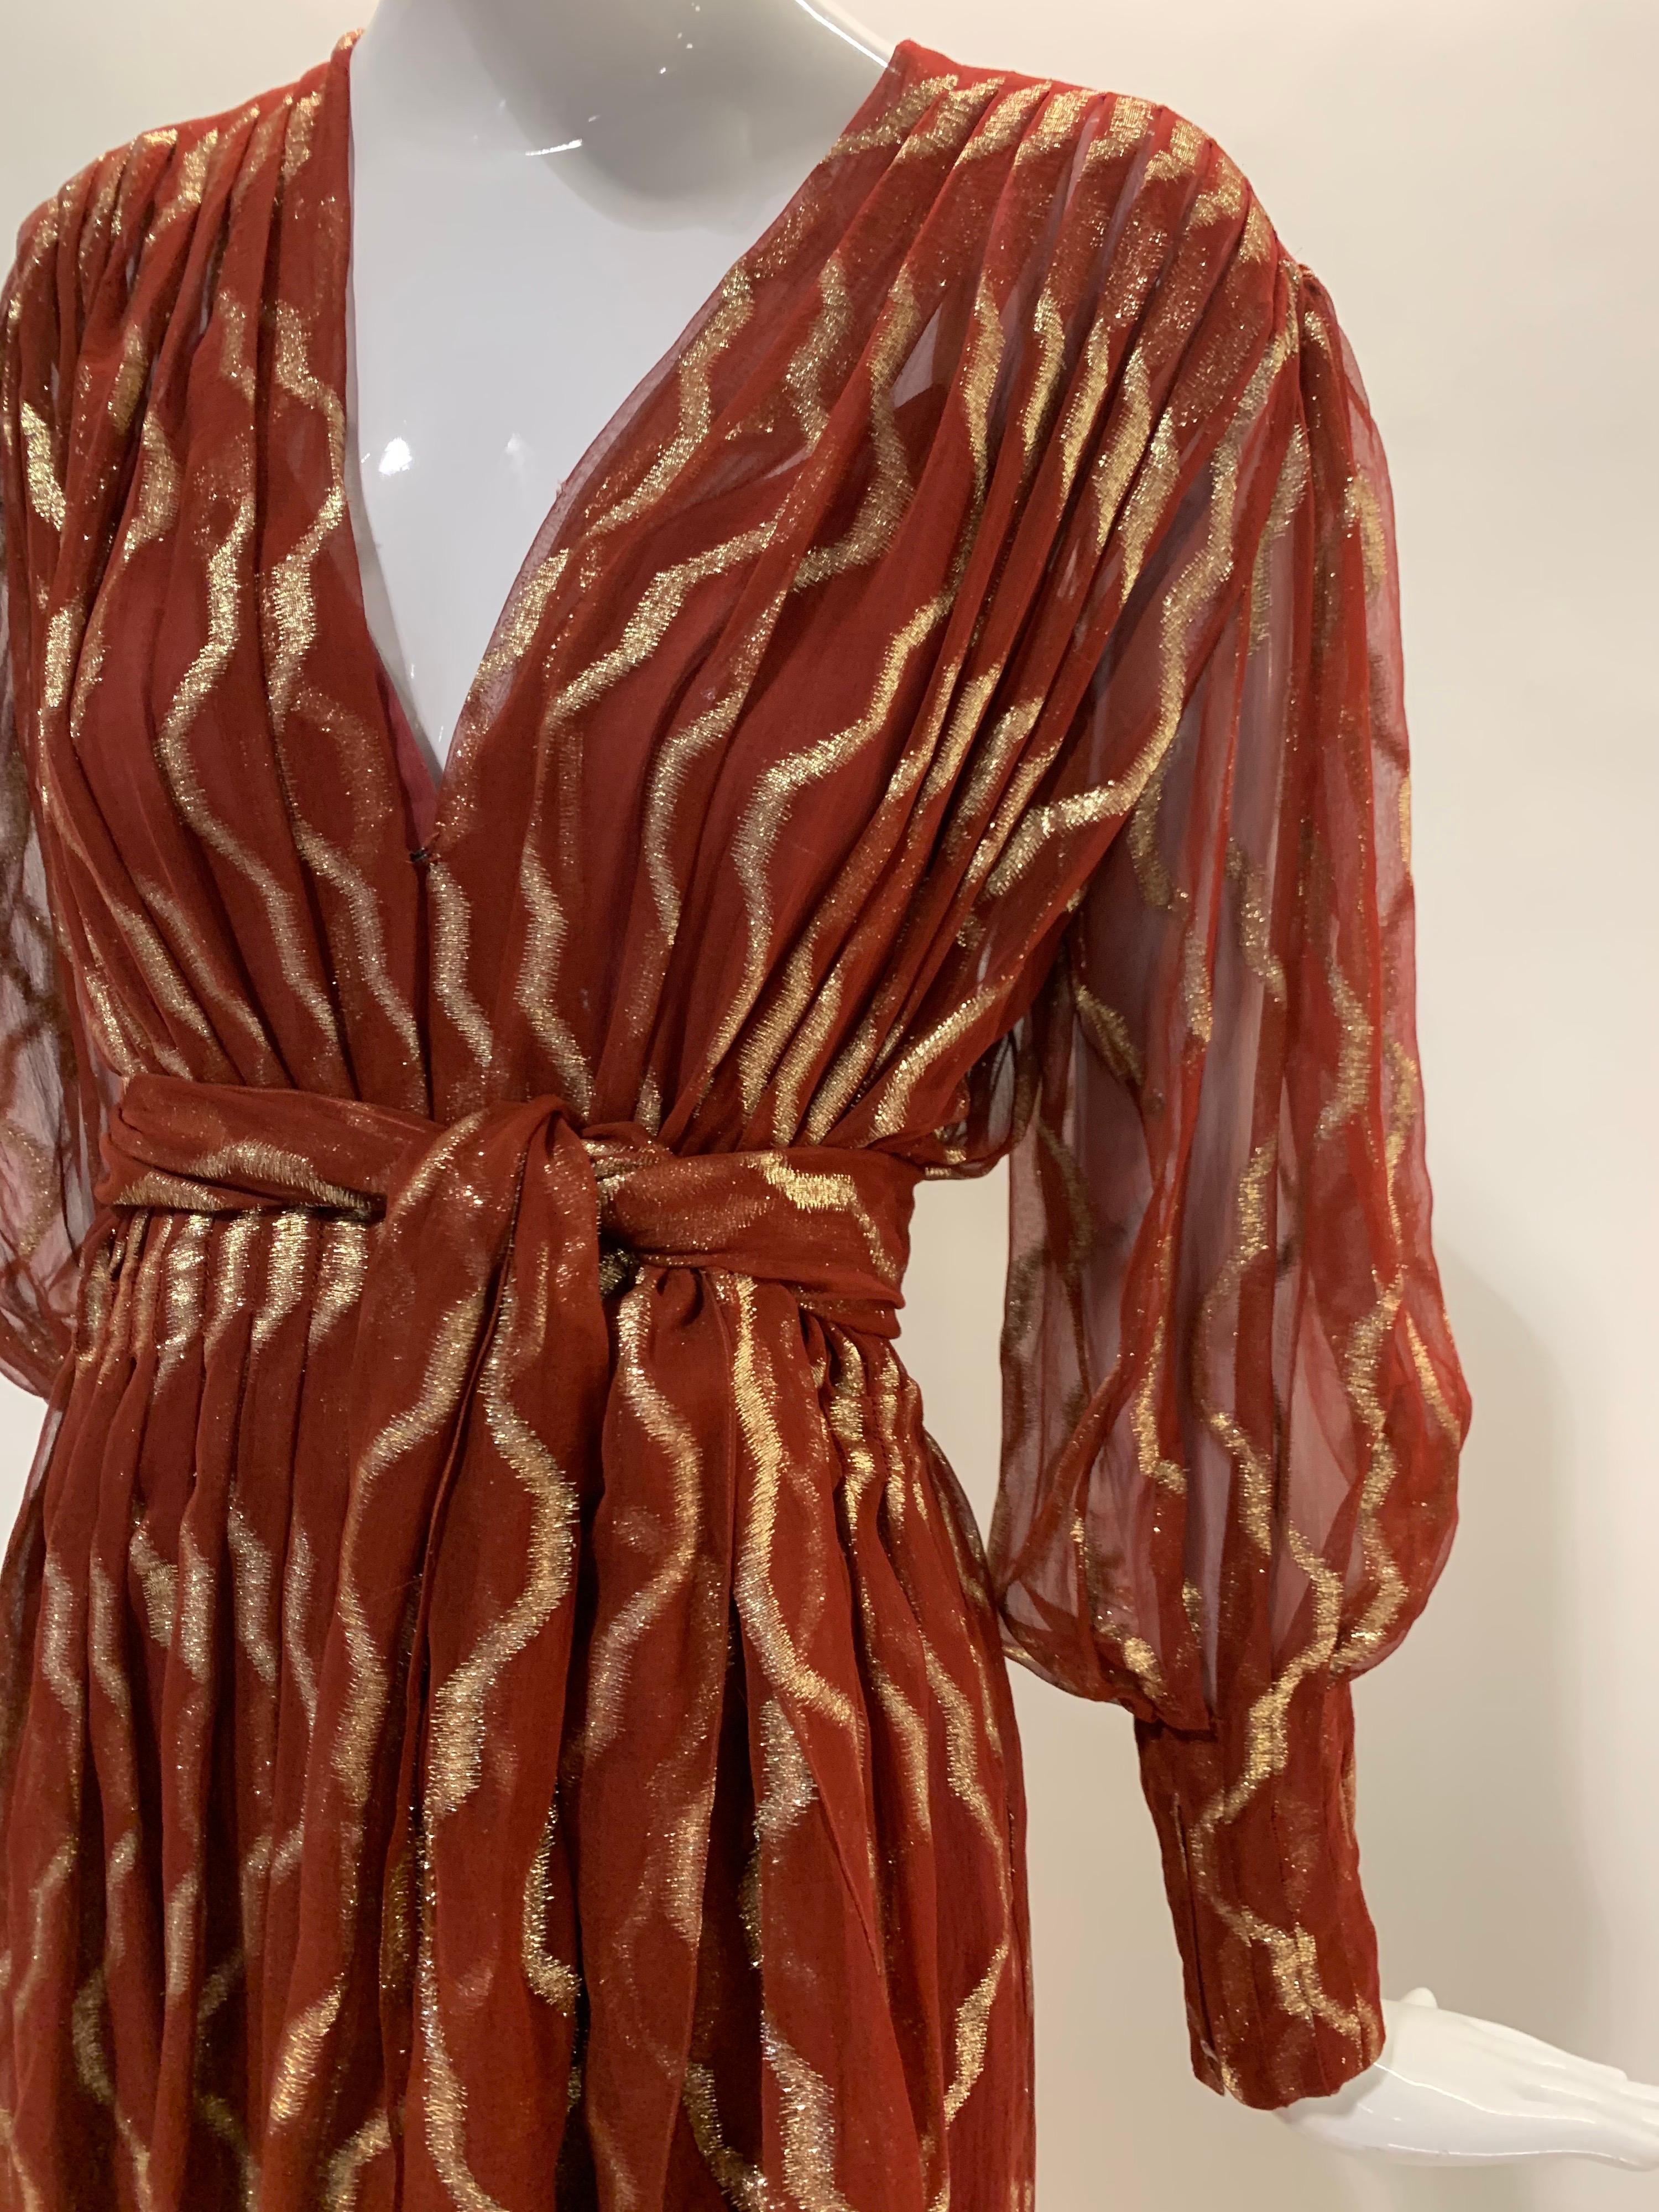 1980 Pauline Trigere Carnelian Silk Chiffon Lame Pleated Dress w/ Matching Sash In Excellent Condition For Sale In Gresham, OR